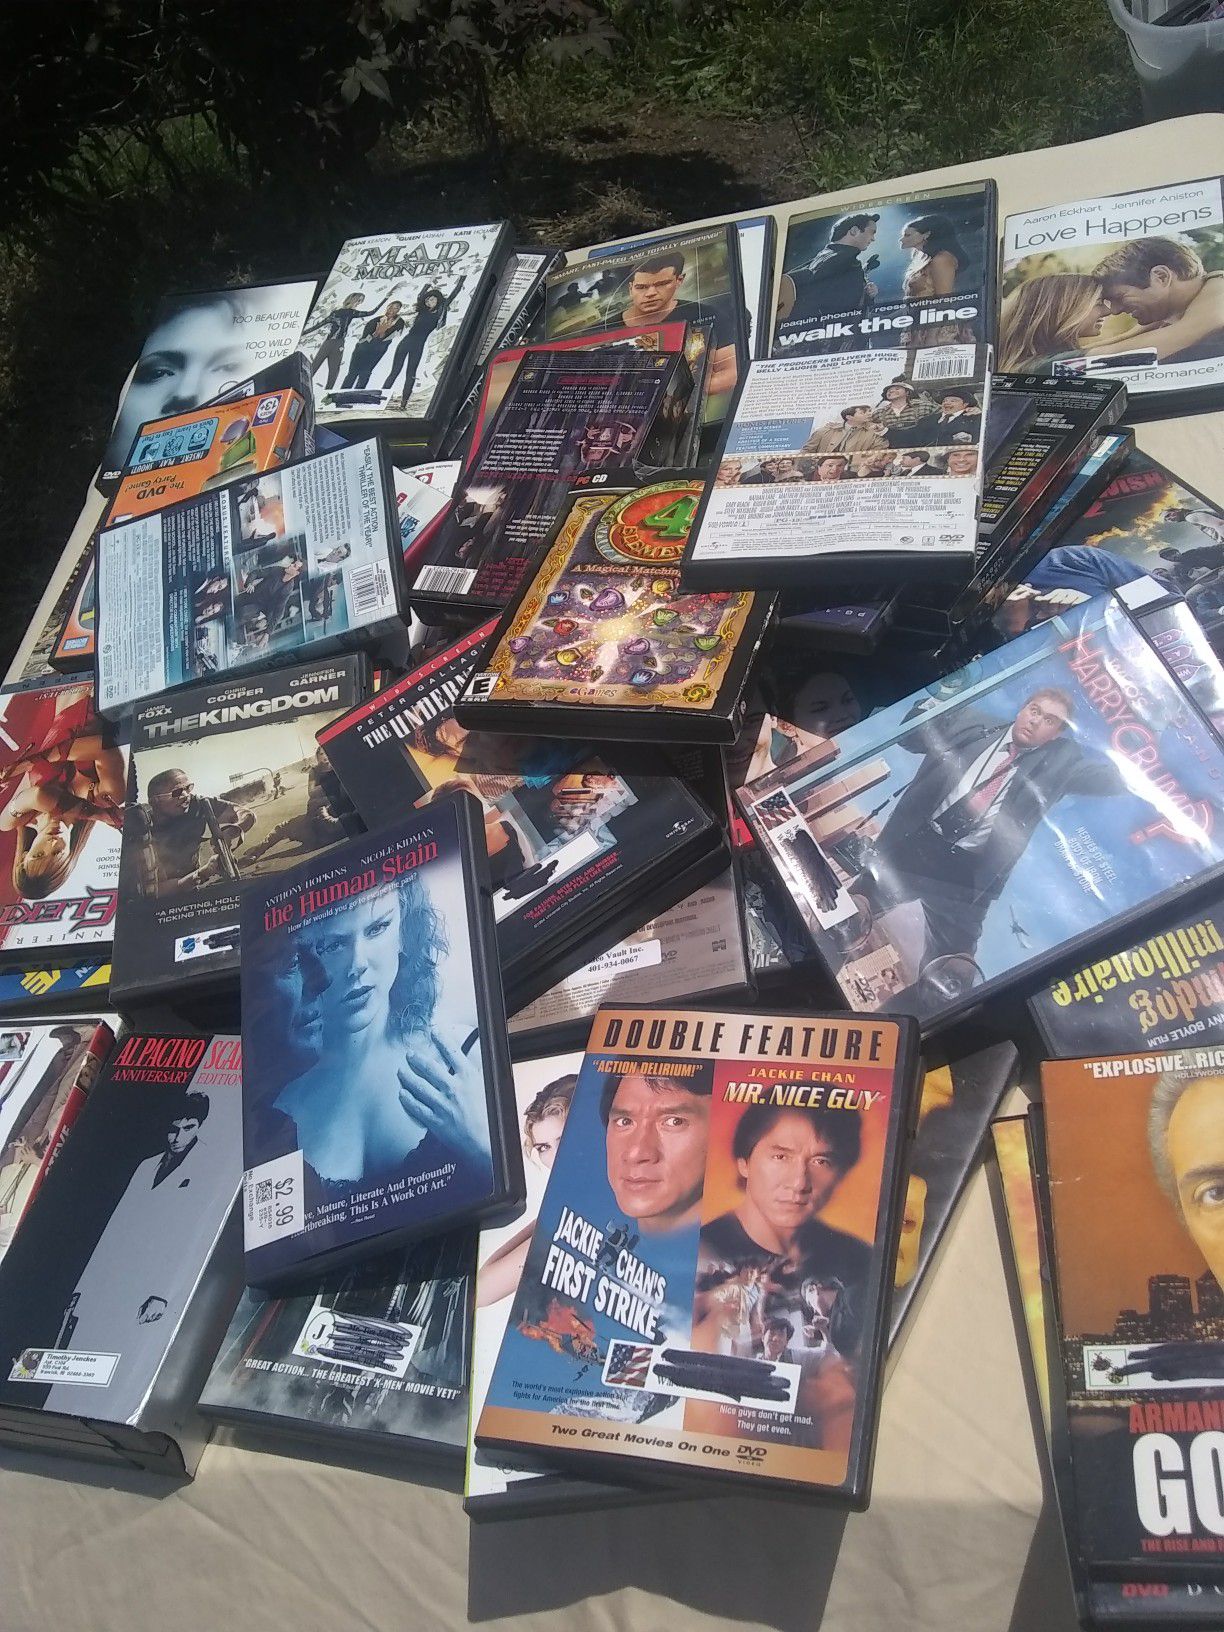 DVD and VHS Hundreds of them come see movies!